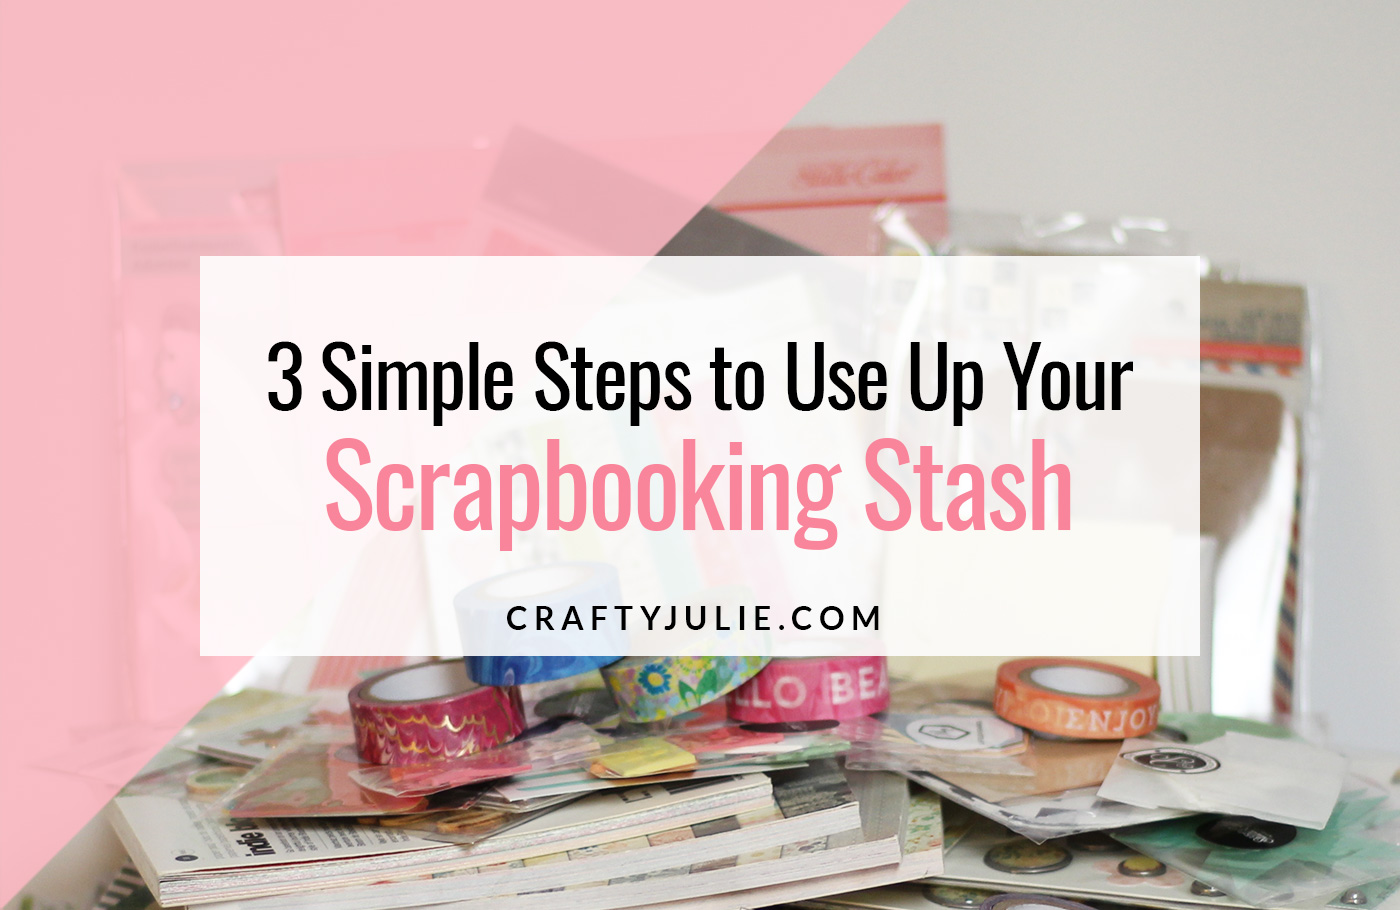 Crafty Julie | 3 Simple Steps to Use Up Your Scrapbooking Stash